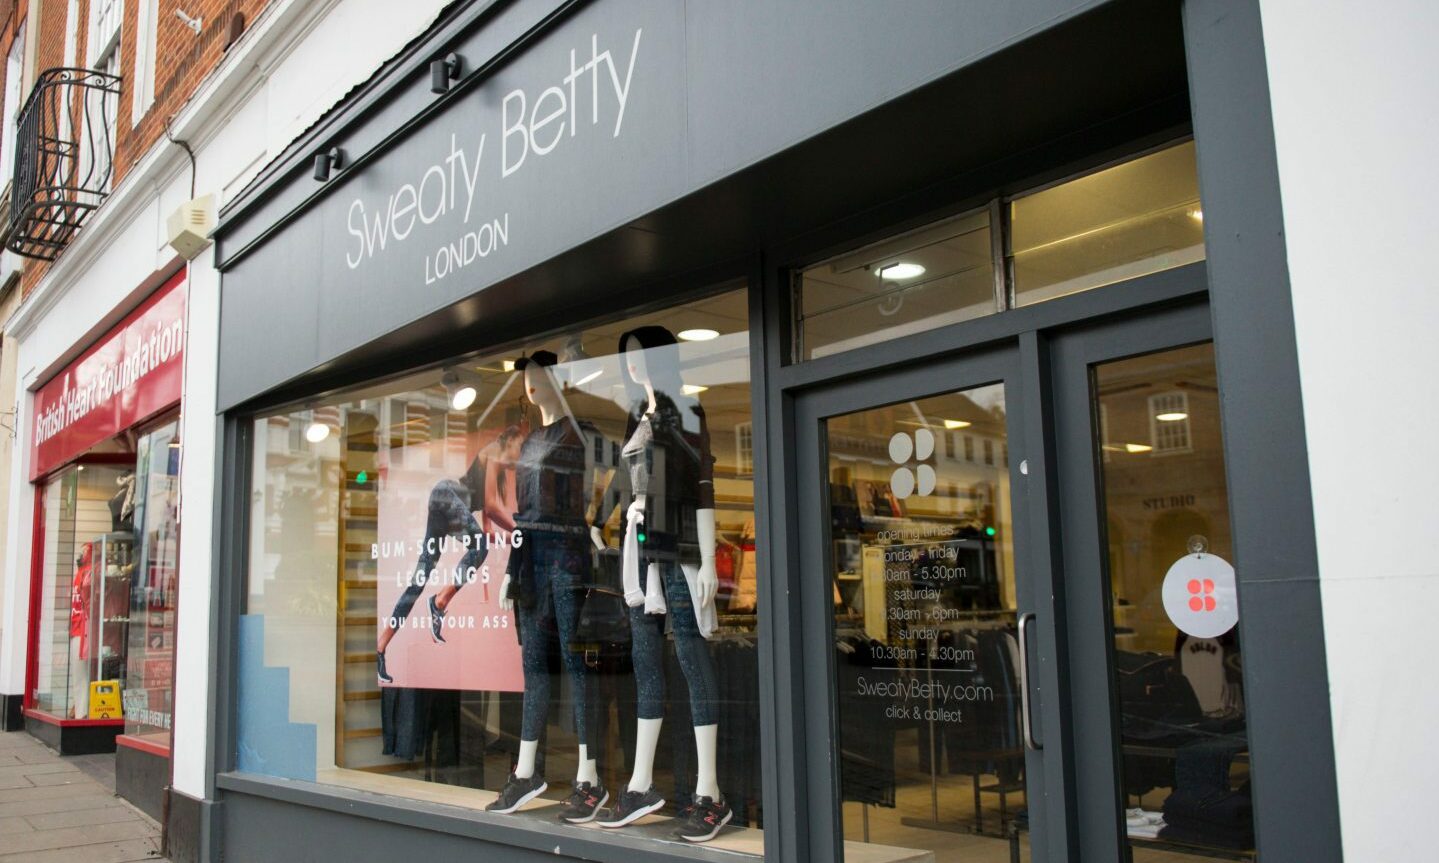 An image of the Sweaty Betty shop in Surrey